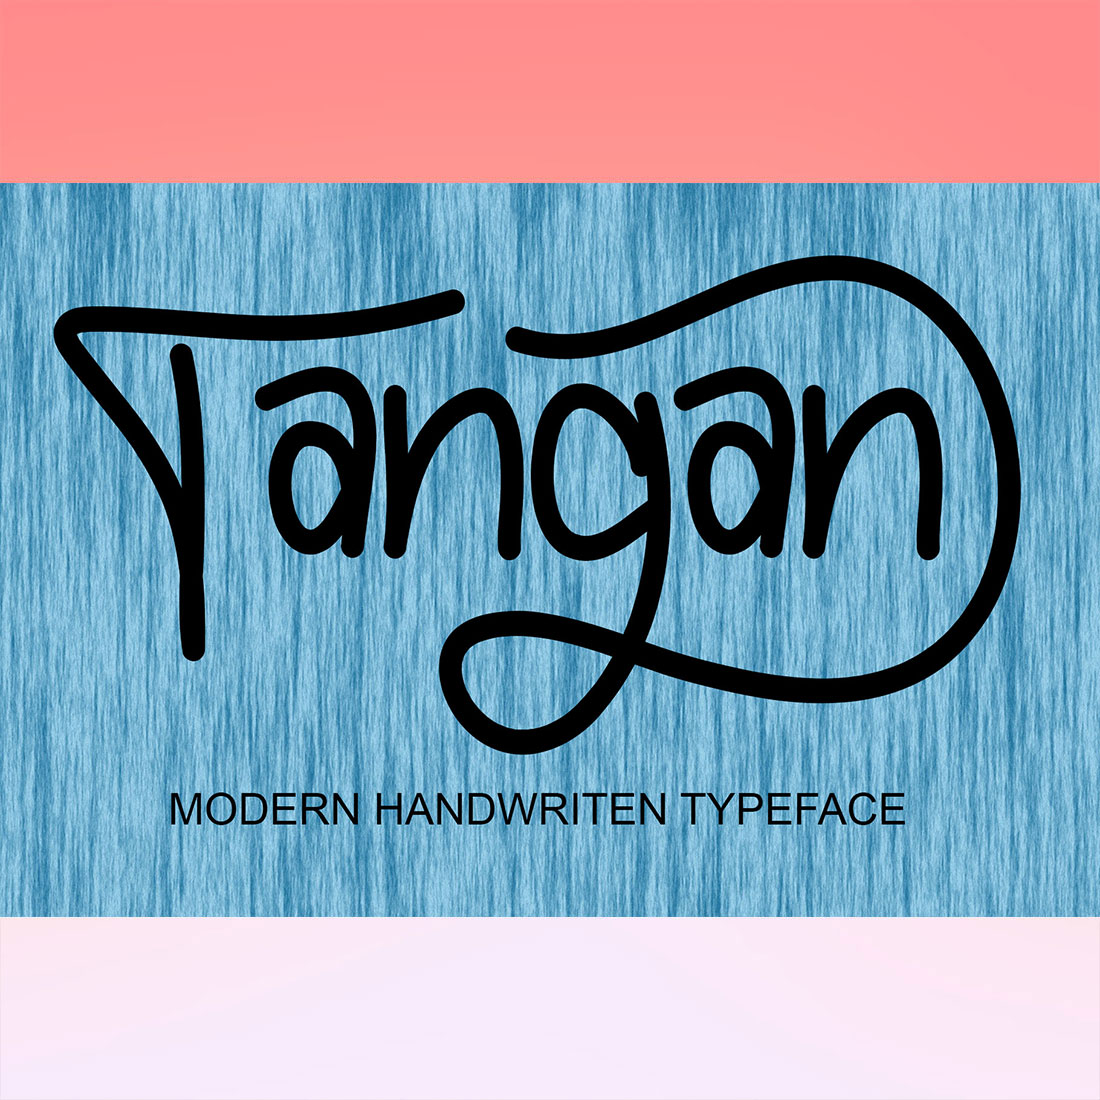 Tangan-only$8 cover image.